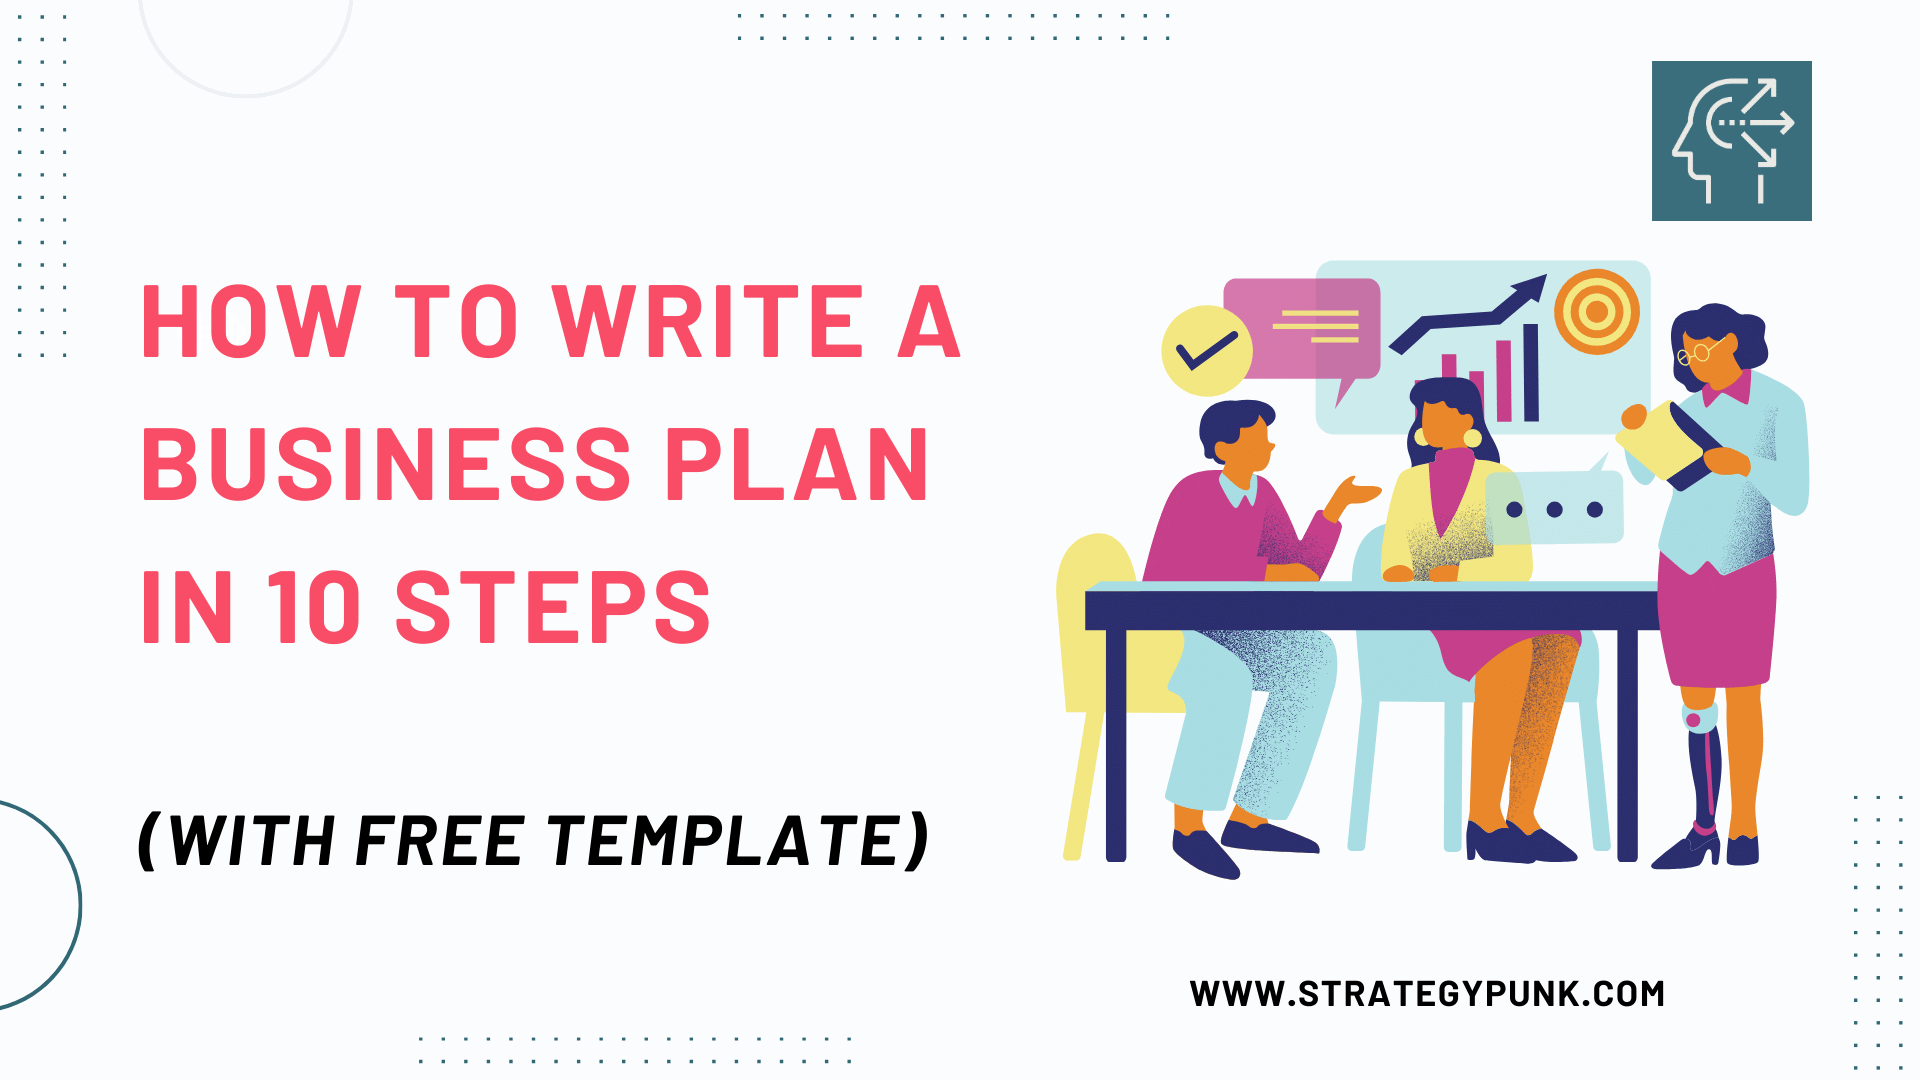 How to Write a Business Plan in 10 Steps (With FREE Template)